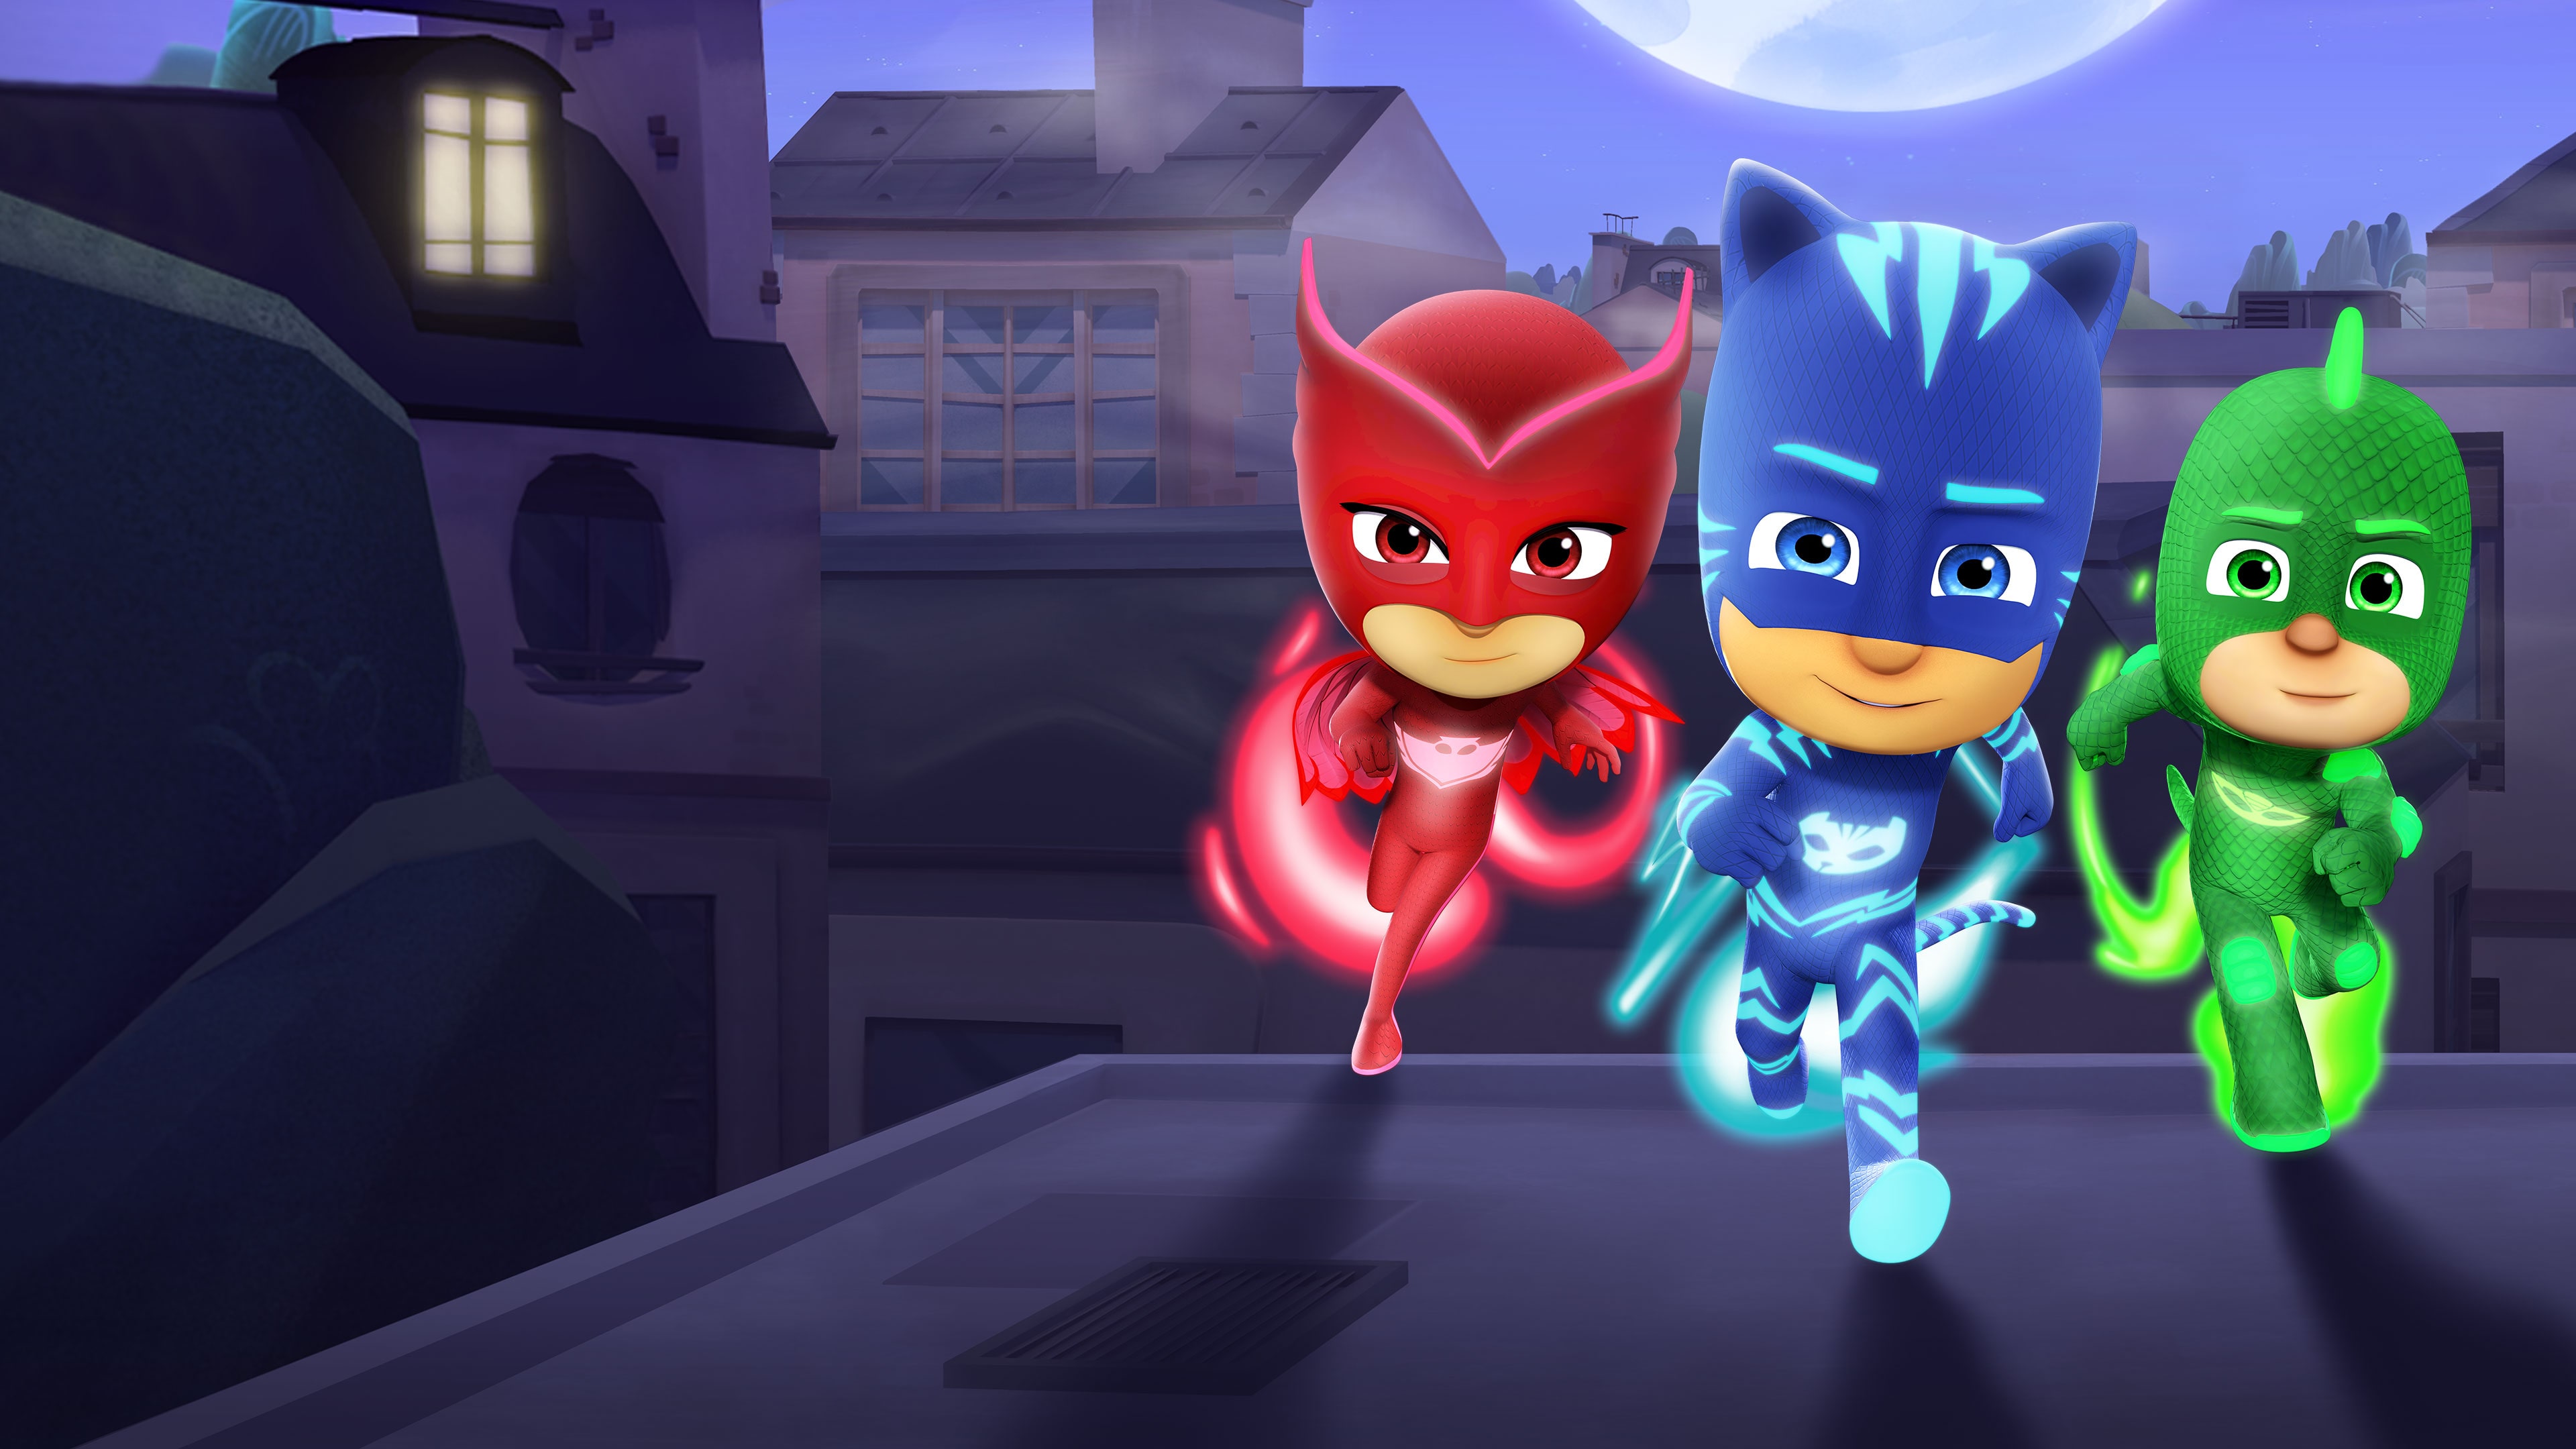 PJ MASKS: HEROES OF THE NIGHT - COMPLETE EDITION